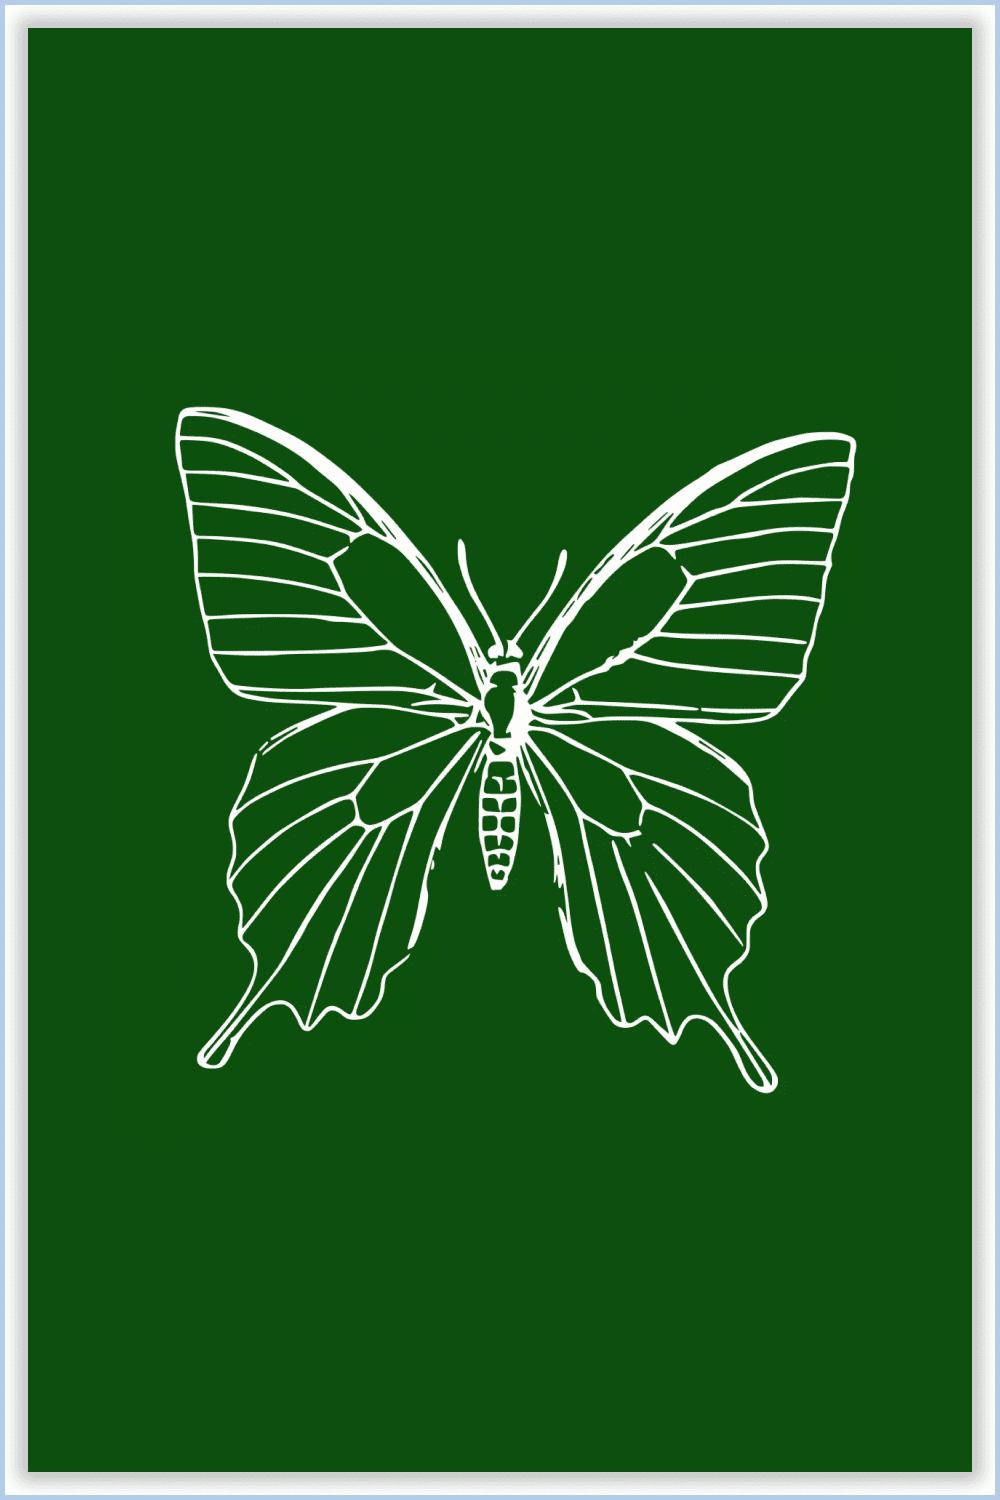 Image of a well-drawn white butterfly on a green background.